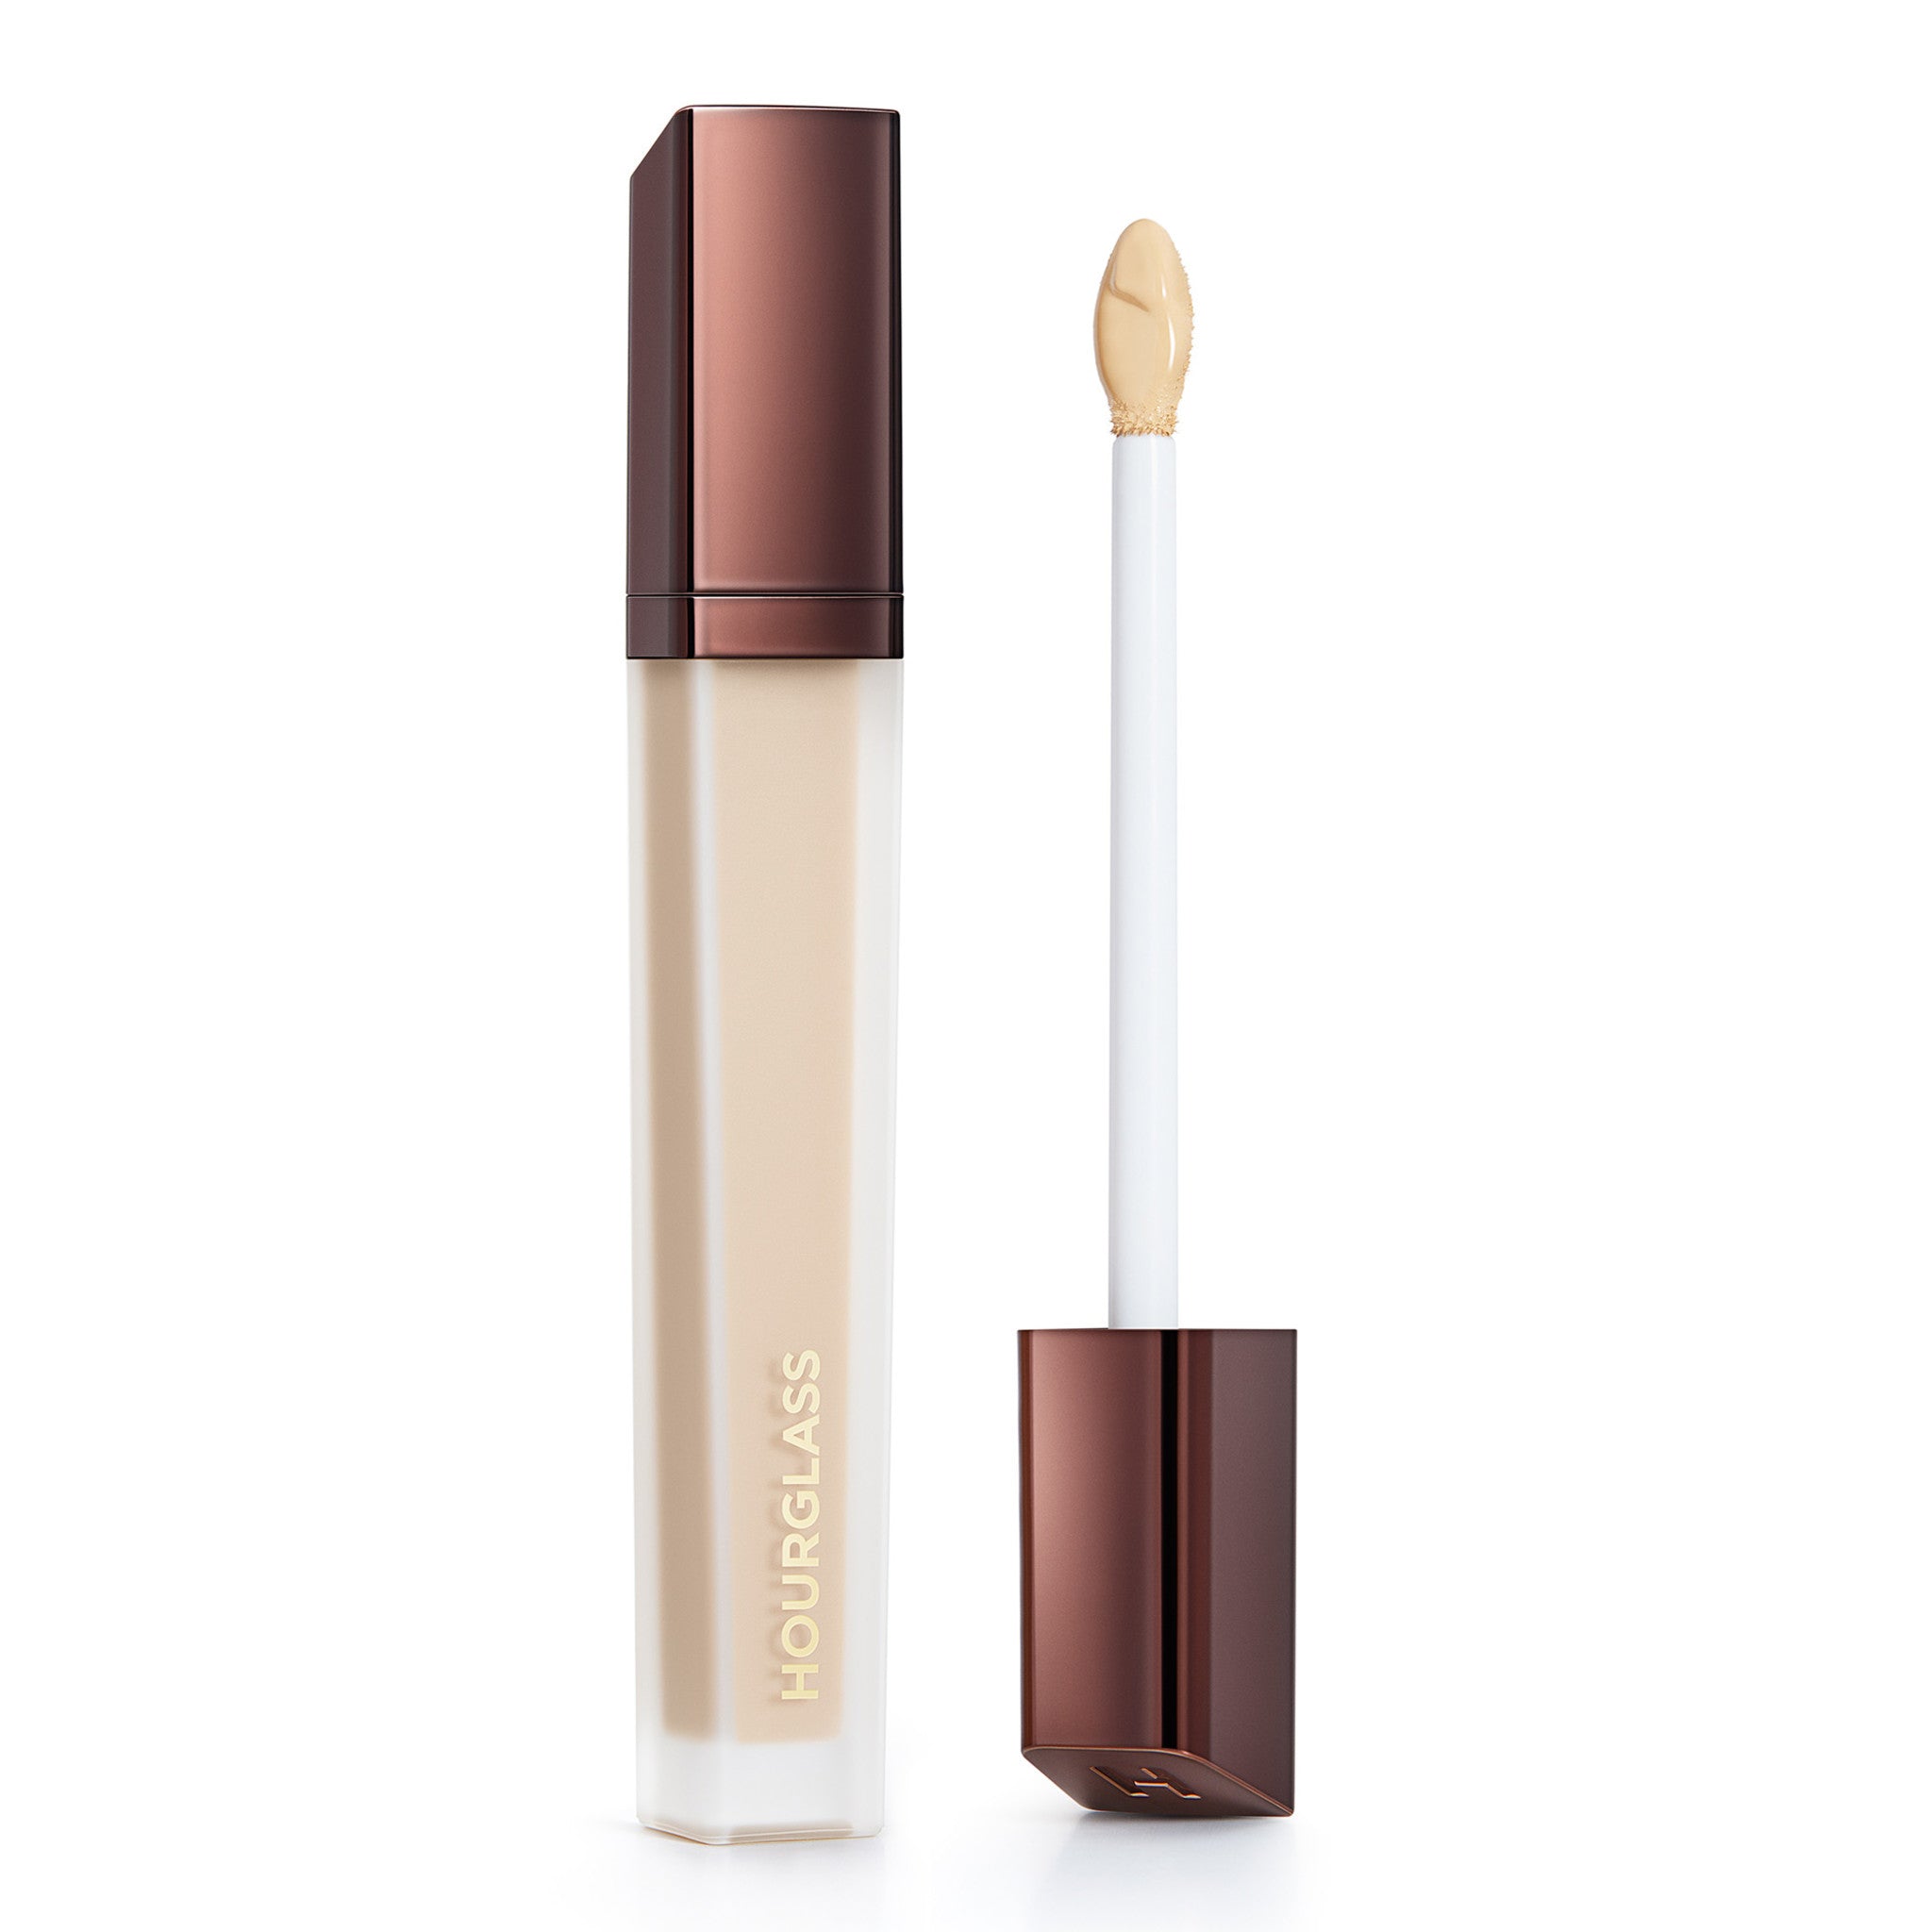 Hourglass Vanish Airbrush Concealer Color/Shade variant: Birch 1 main image. This product is for light neutral complexions